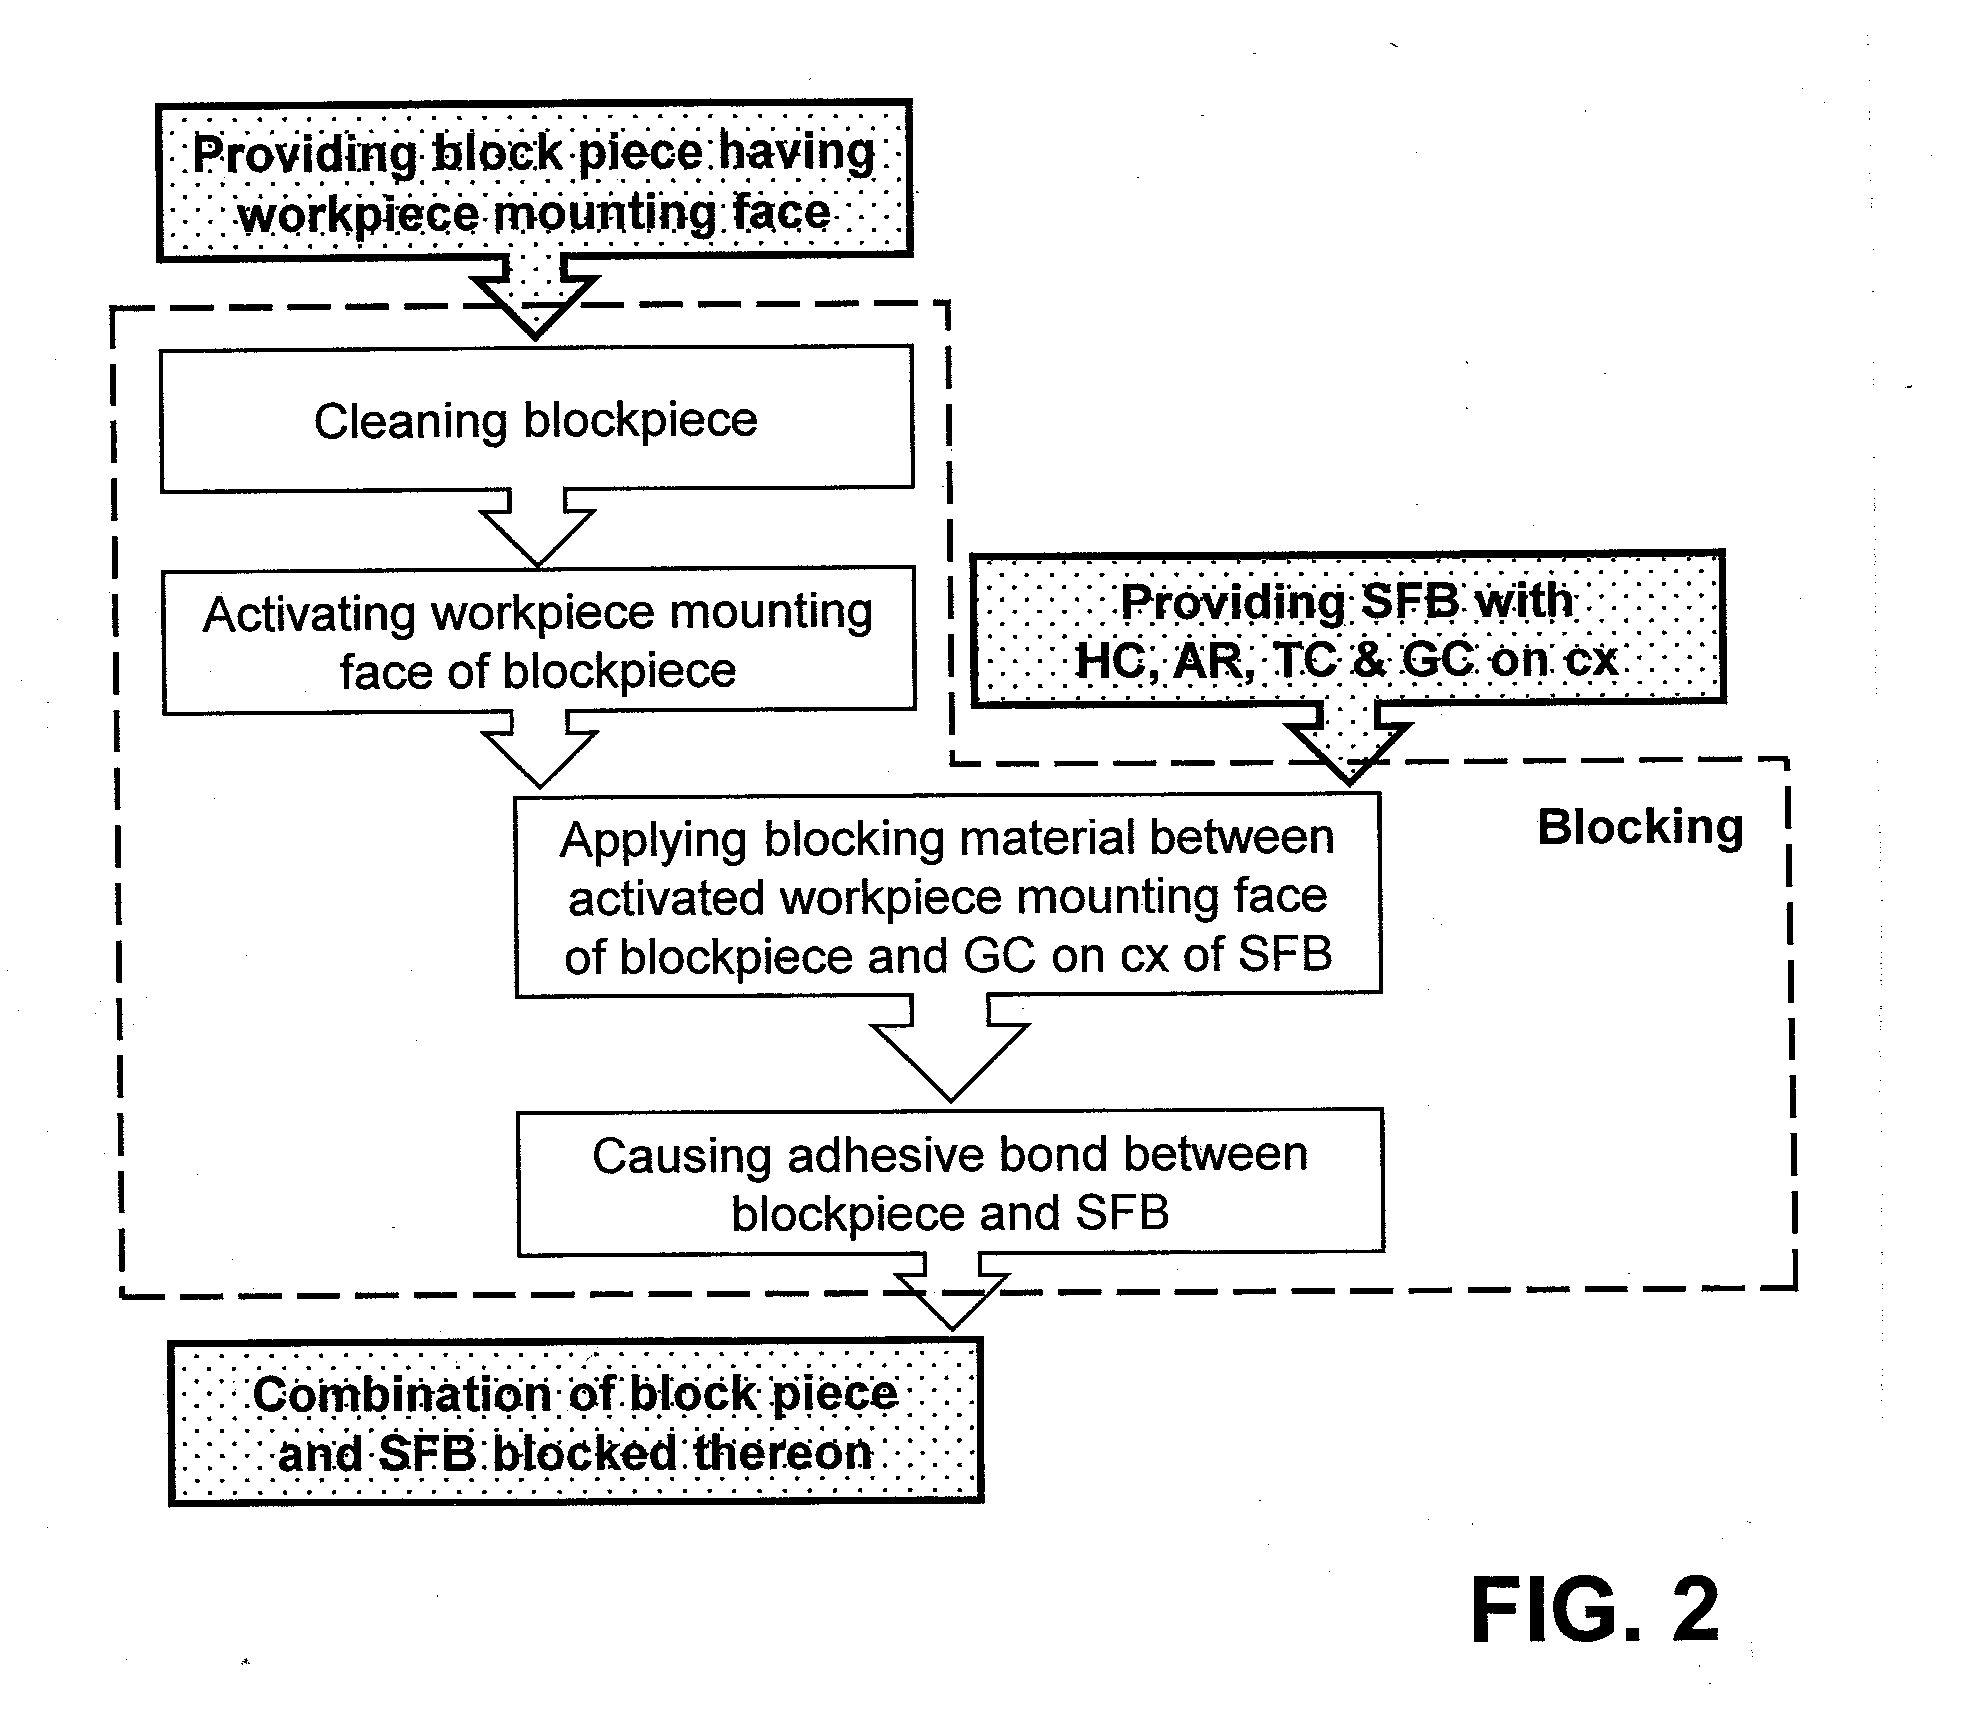 Lens blank having a temporary grip coating for a method for manufacturing spectacle lenses according to a prescription